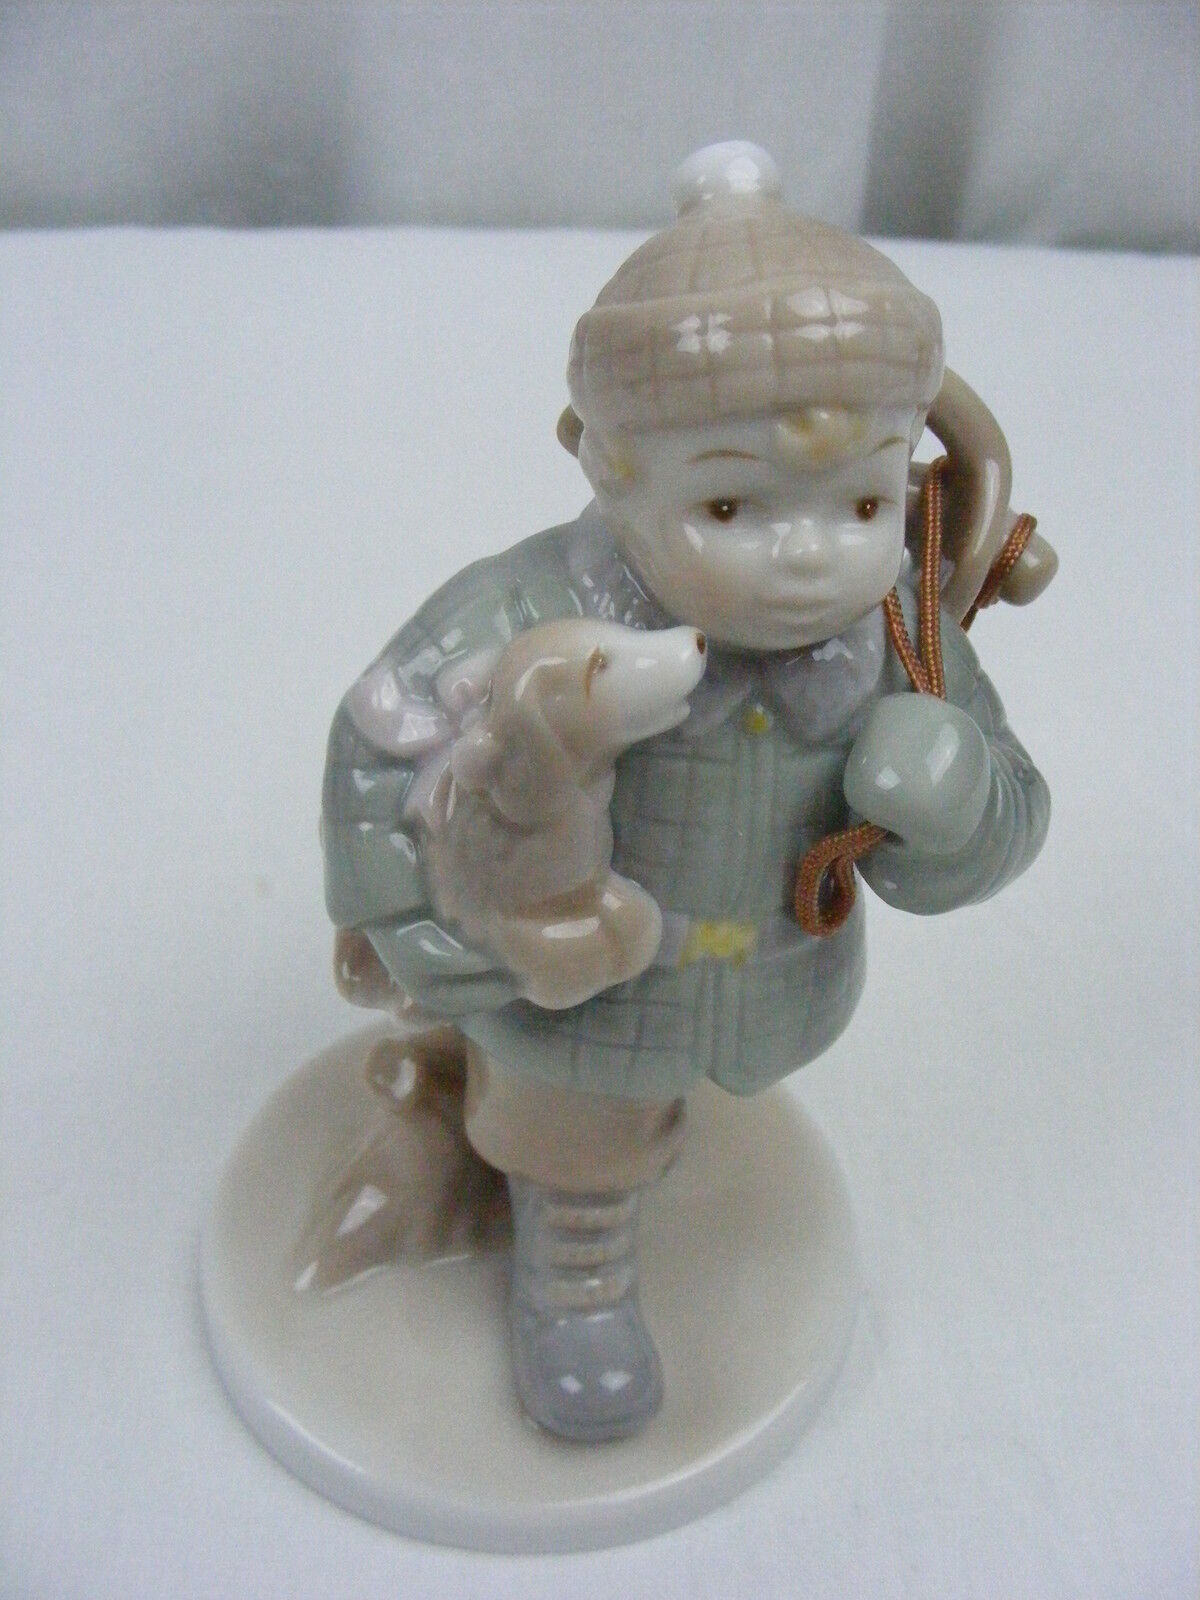 Vintage Marbella Collection Porcelain Figurine Boy with Sled Holding Puppy